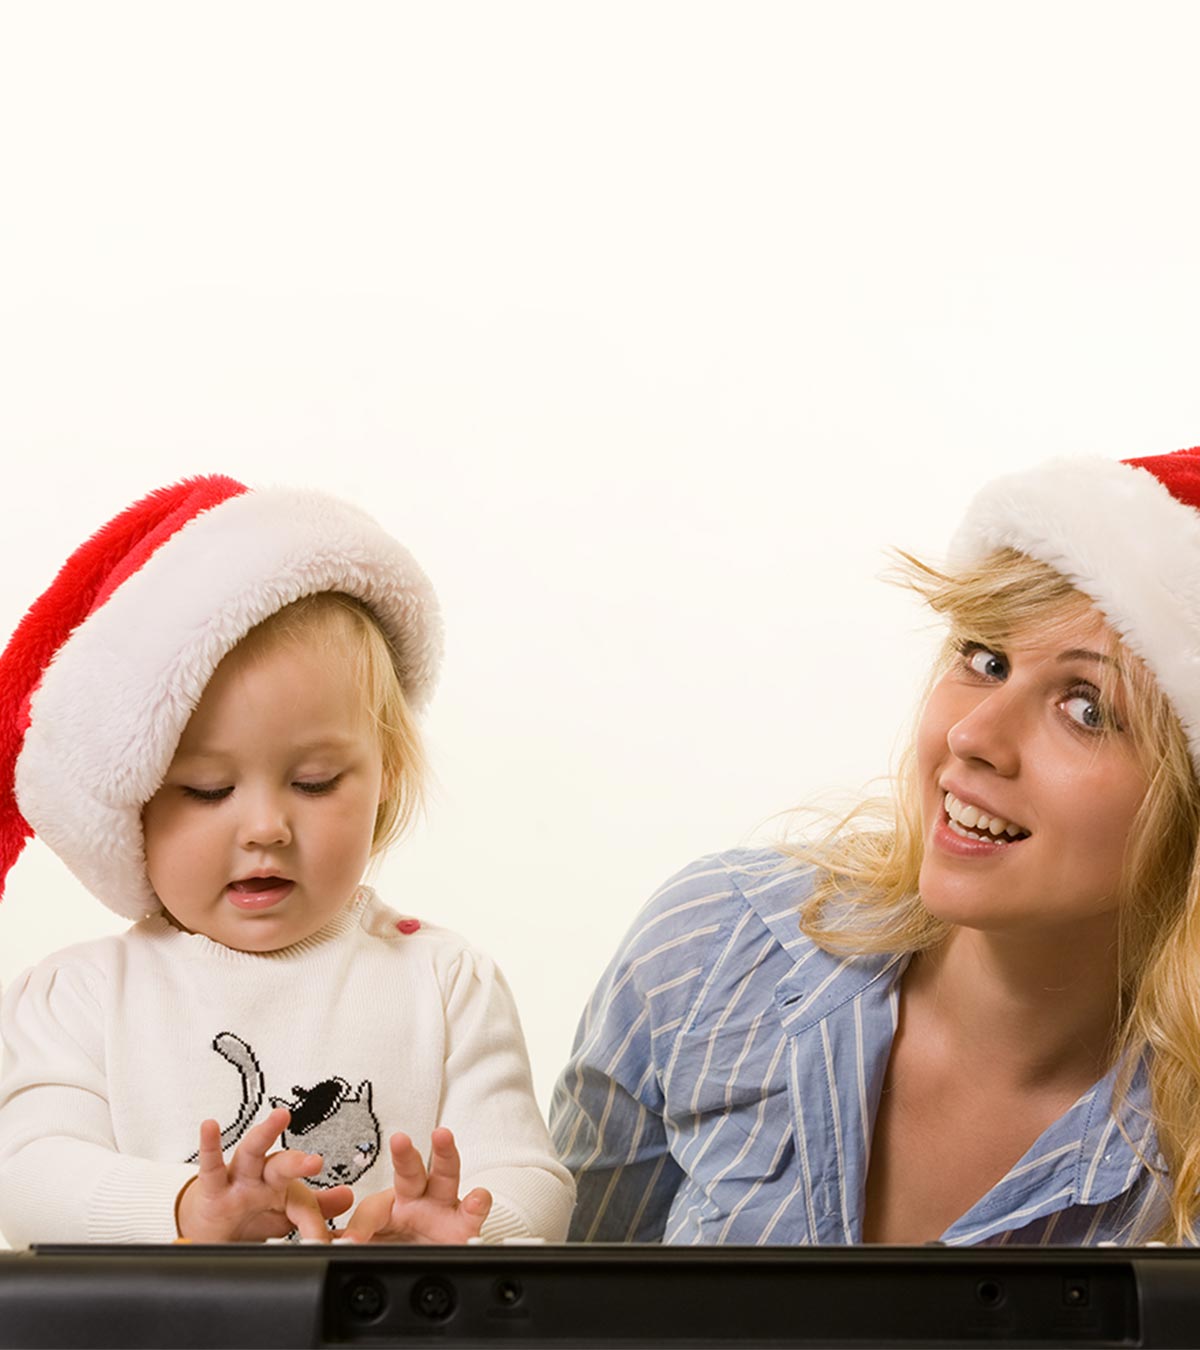 Top 15 Most Popular Christmas Songs For Your Toddlers